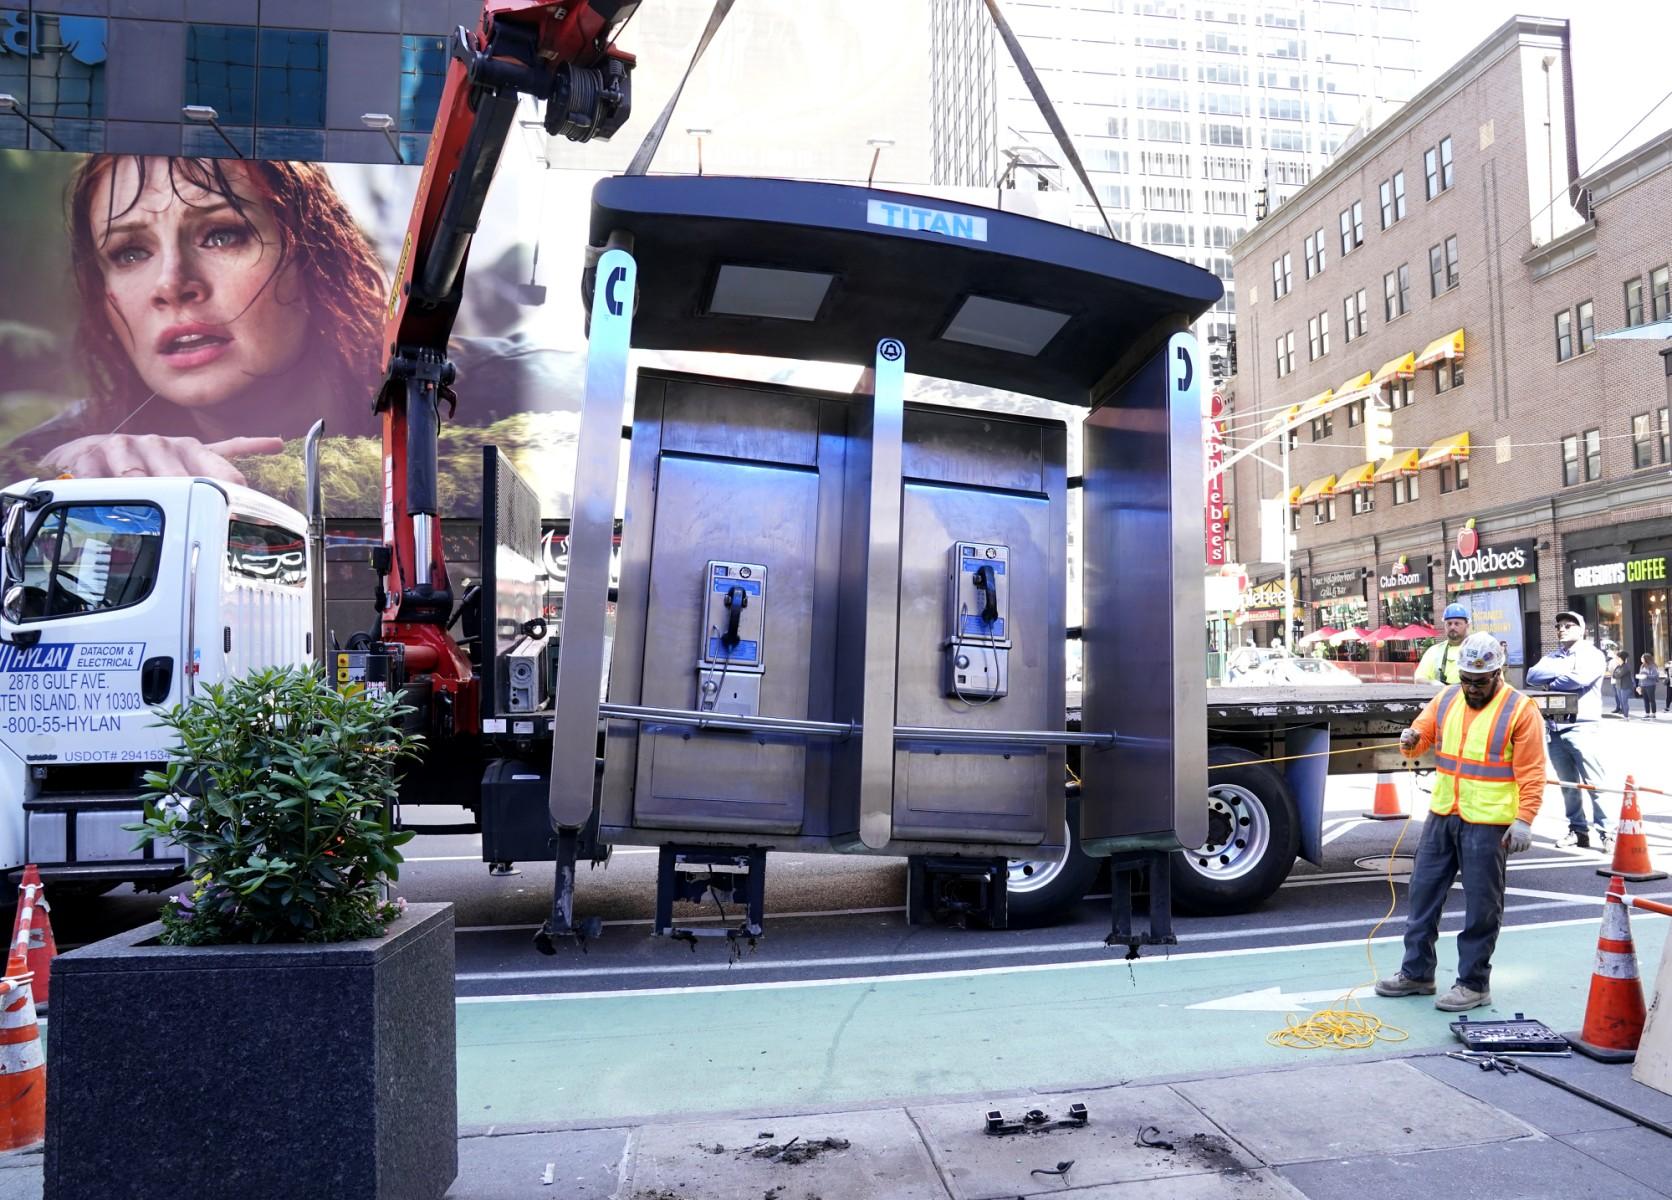 Workers remove the final New York City payphone near Seventh Avenue and 50th Street in Midtown Manhattan, New York City, on May 23. Photo: AFP